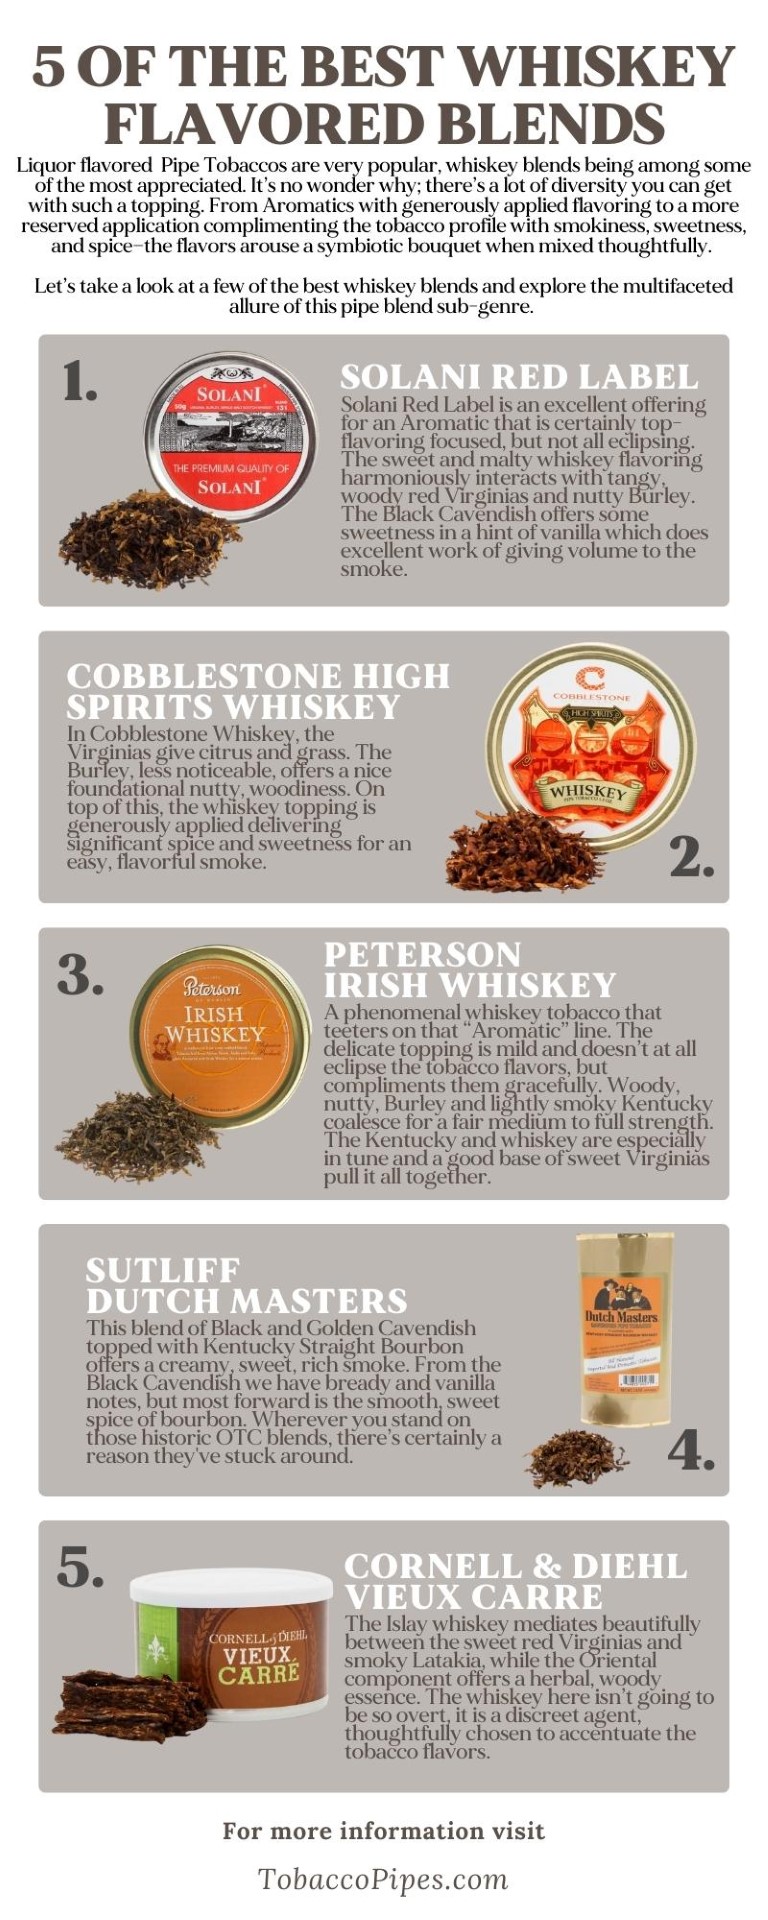 5 of the best whiskey flavored tobacco blends